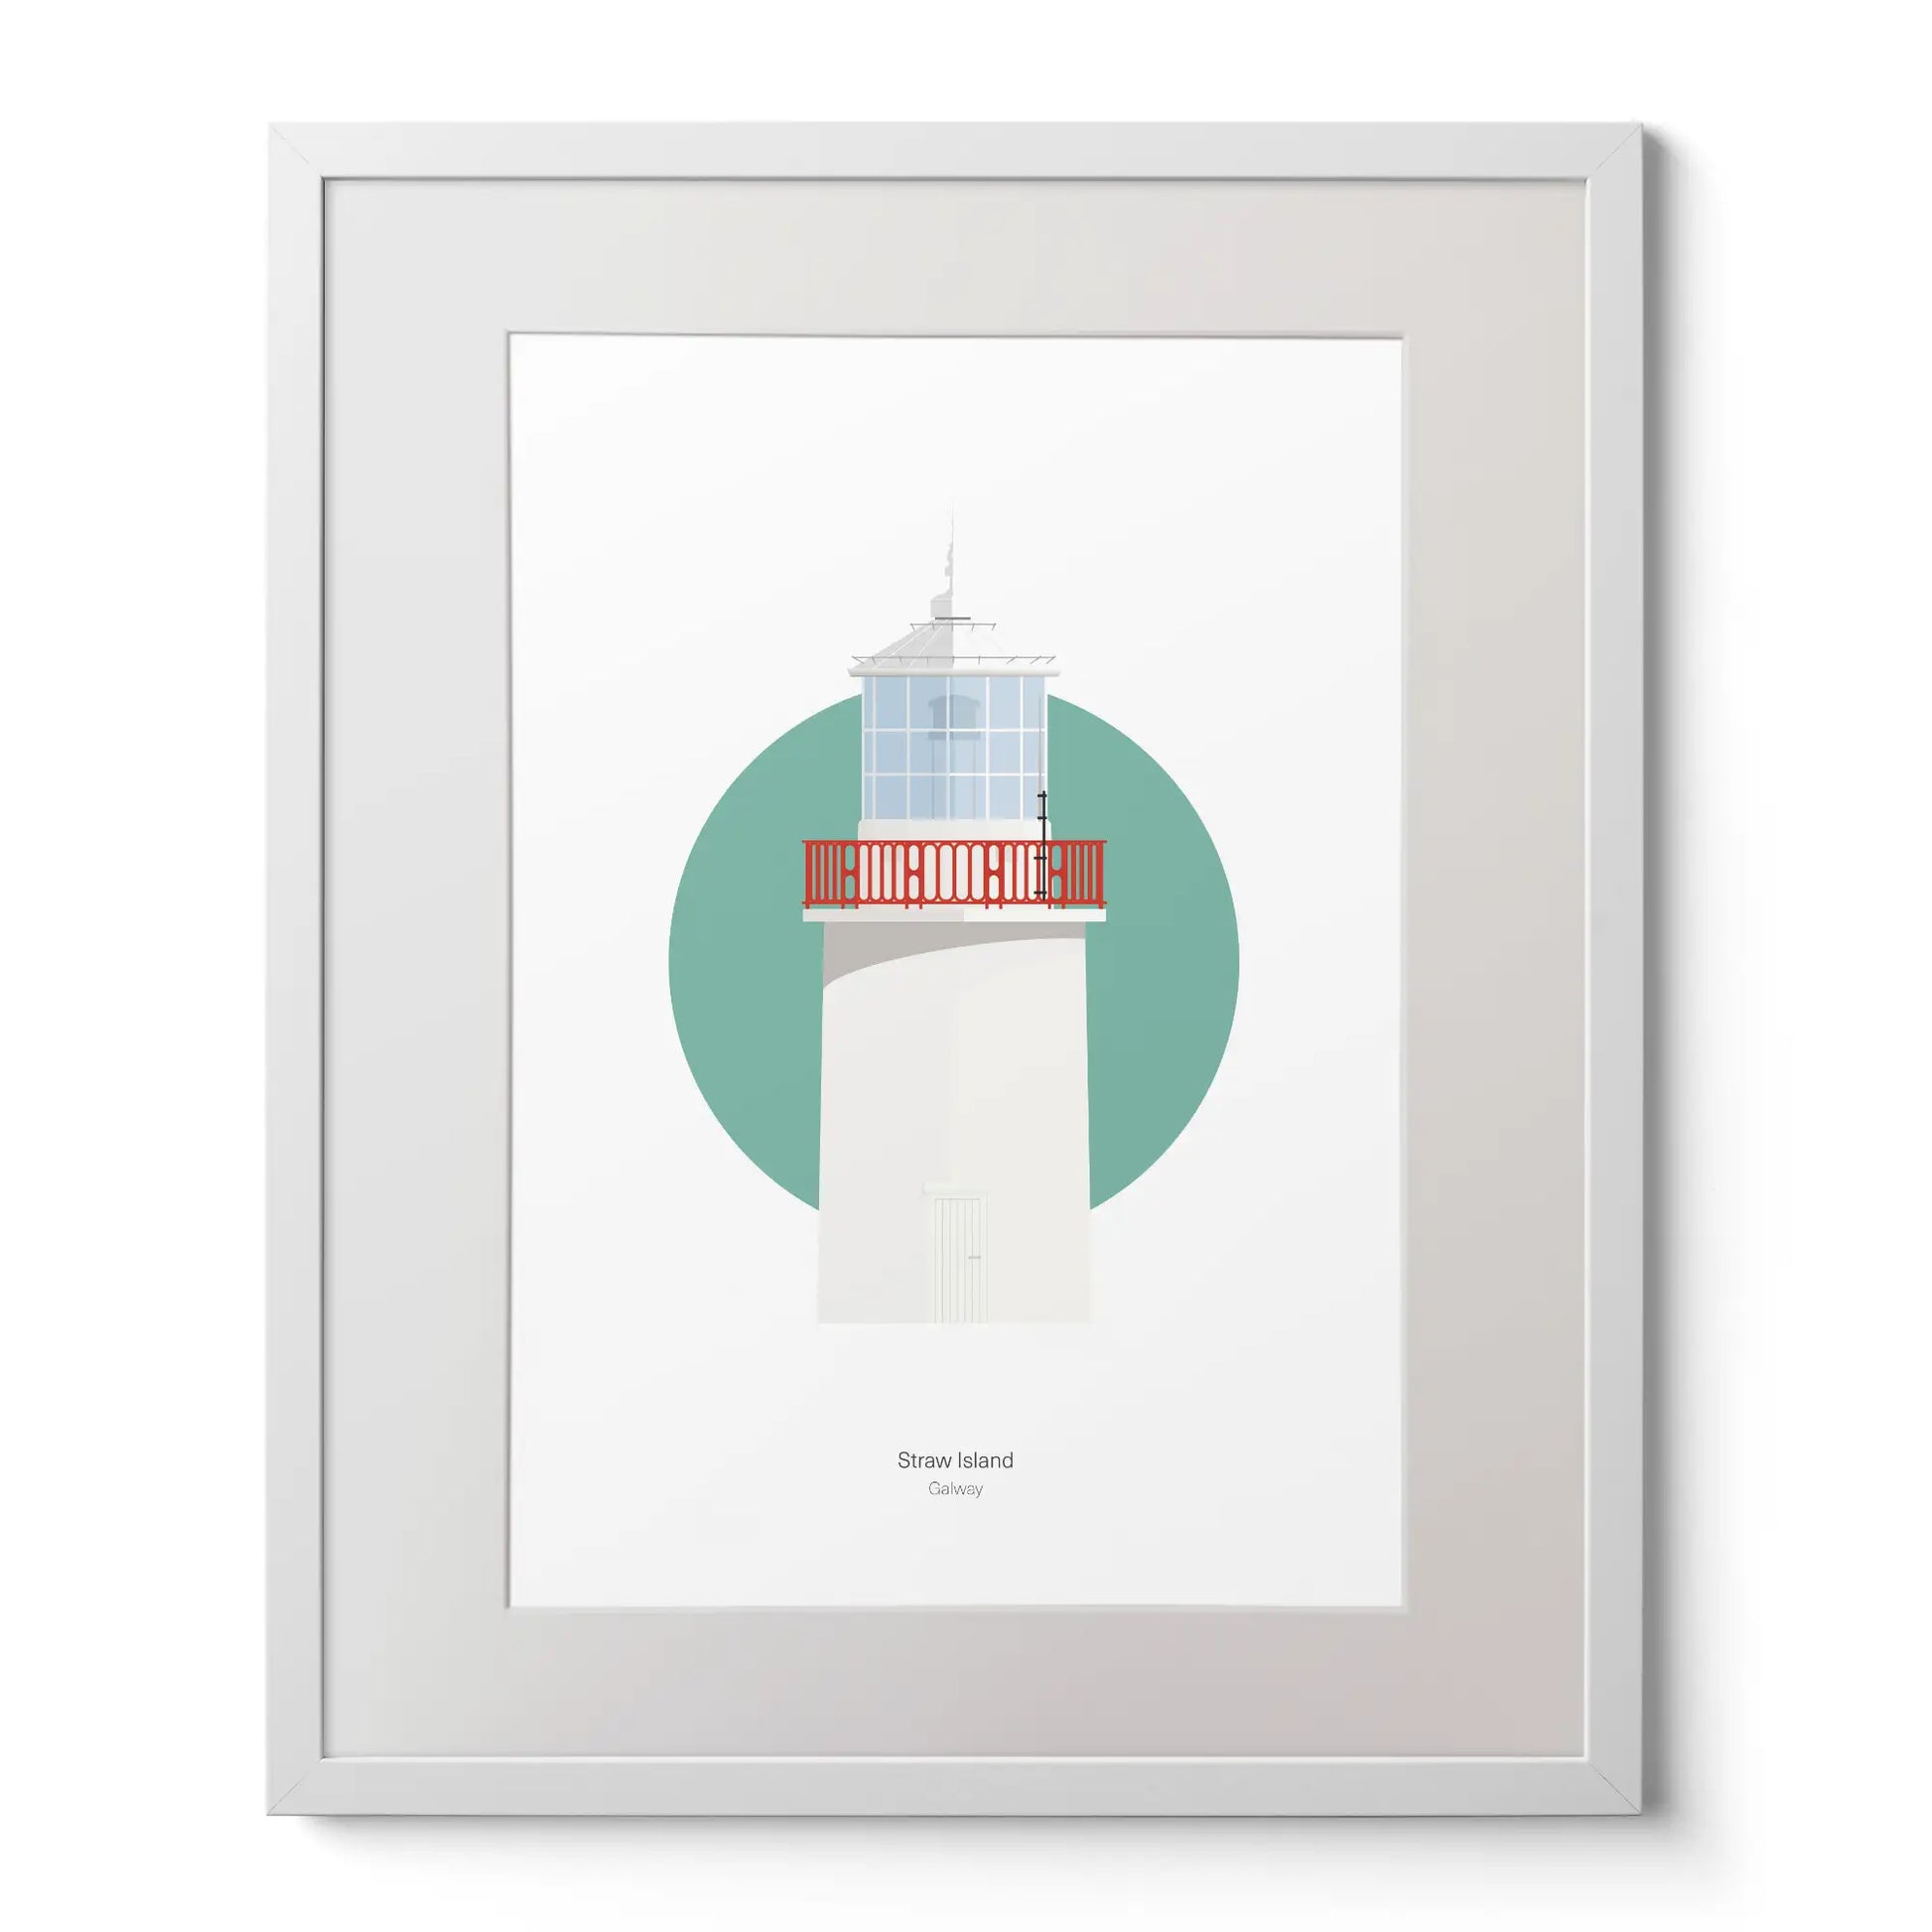 Contemporary art print of Straw Island lighthouse on a white background inside light blue square,  in a white frame measuring 40x50cm.